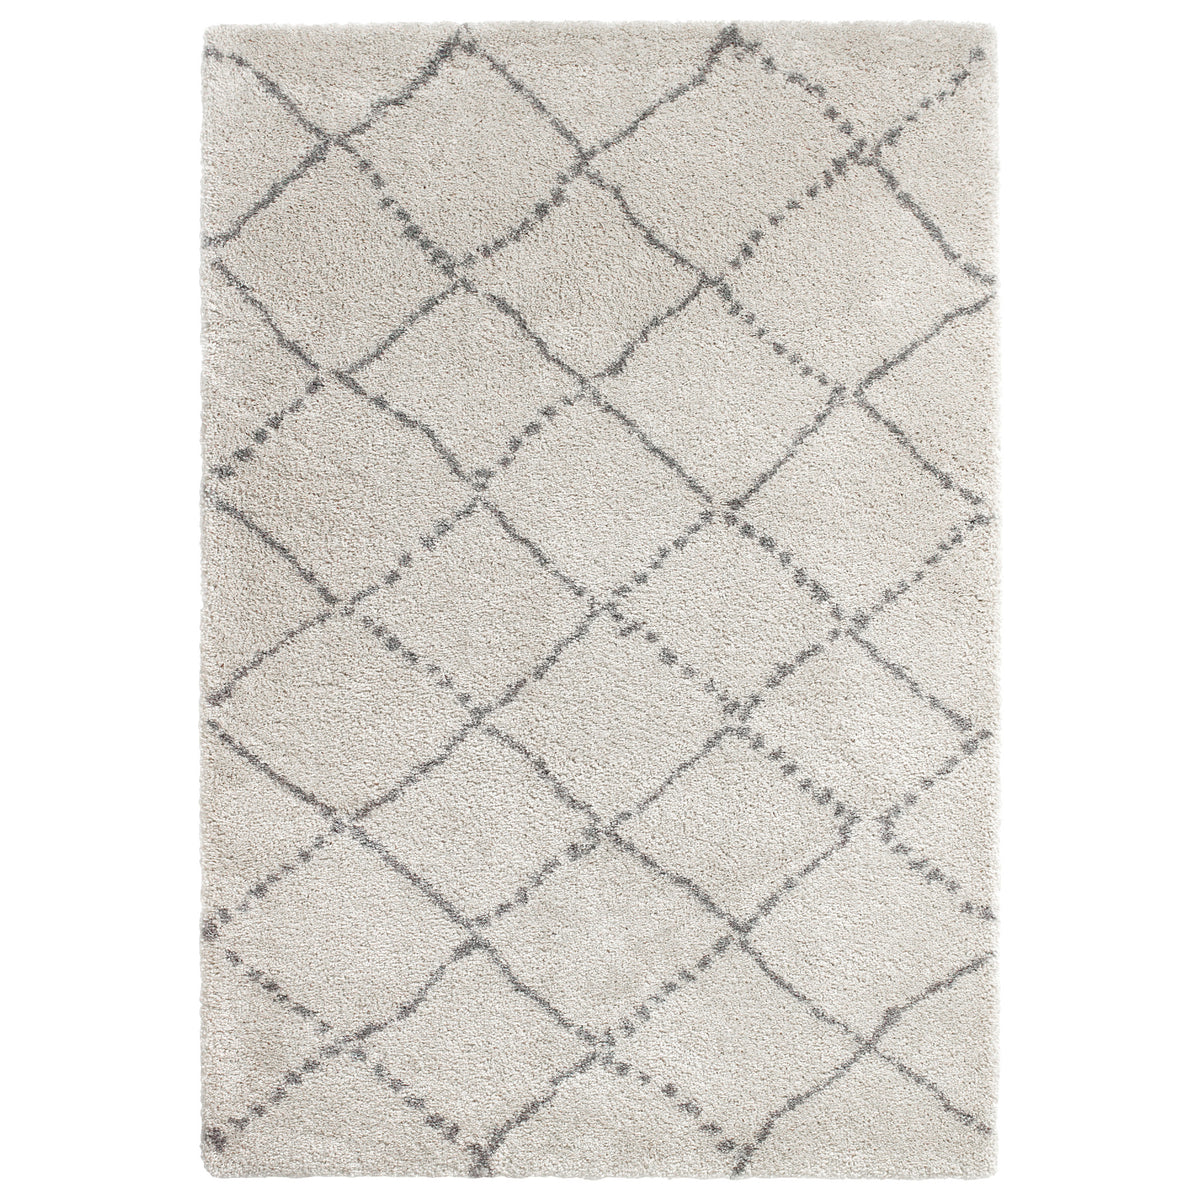 Webster Cream Grey Diamond Two Toned Rug from Roseland Furniture